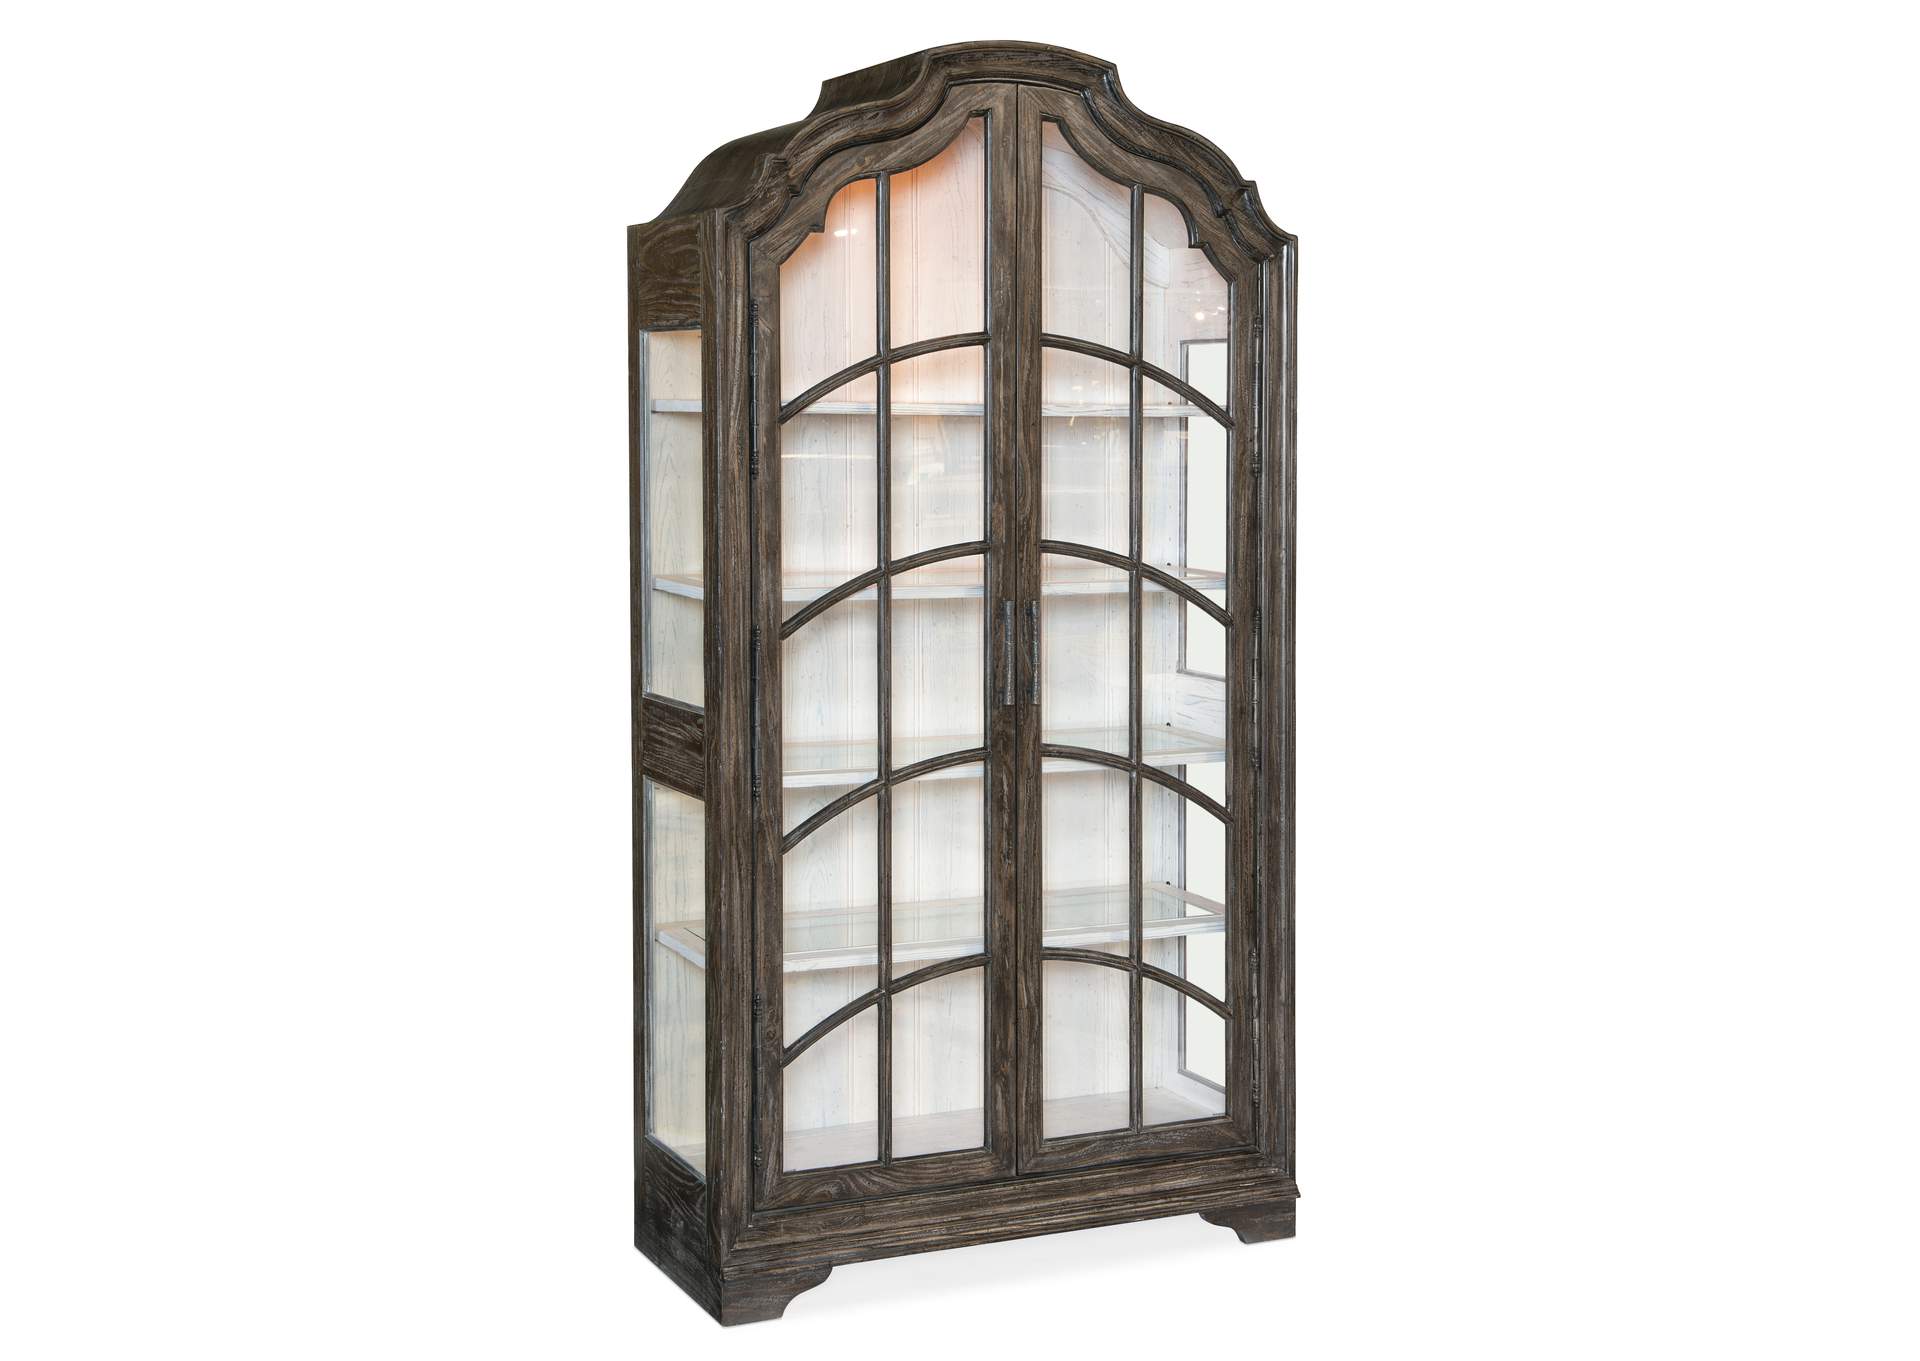 Traditions Curio Cabinet,Hooker Furniture